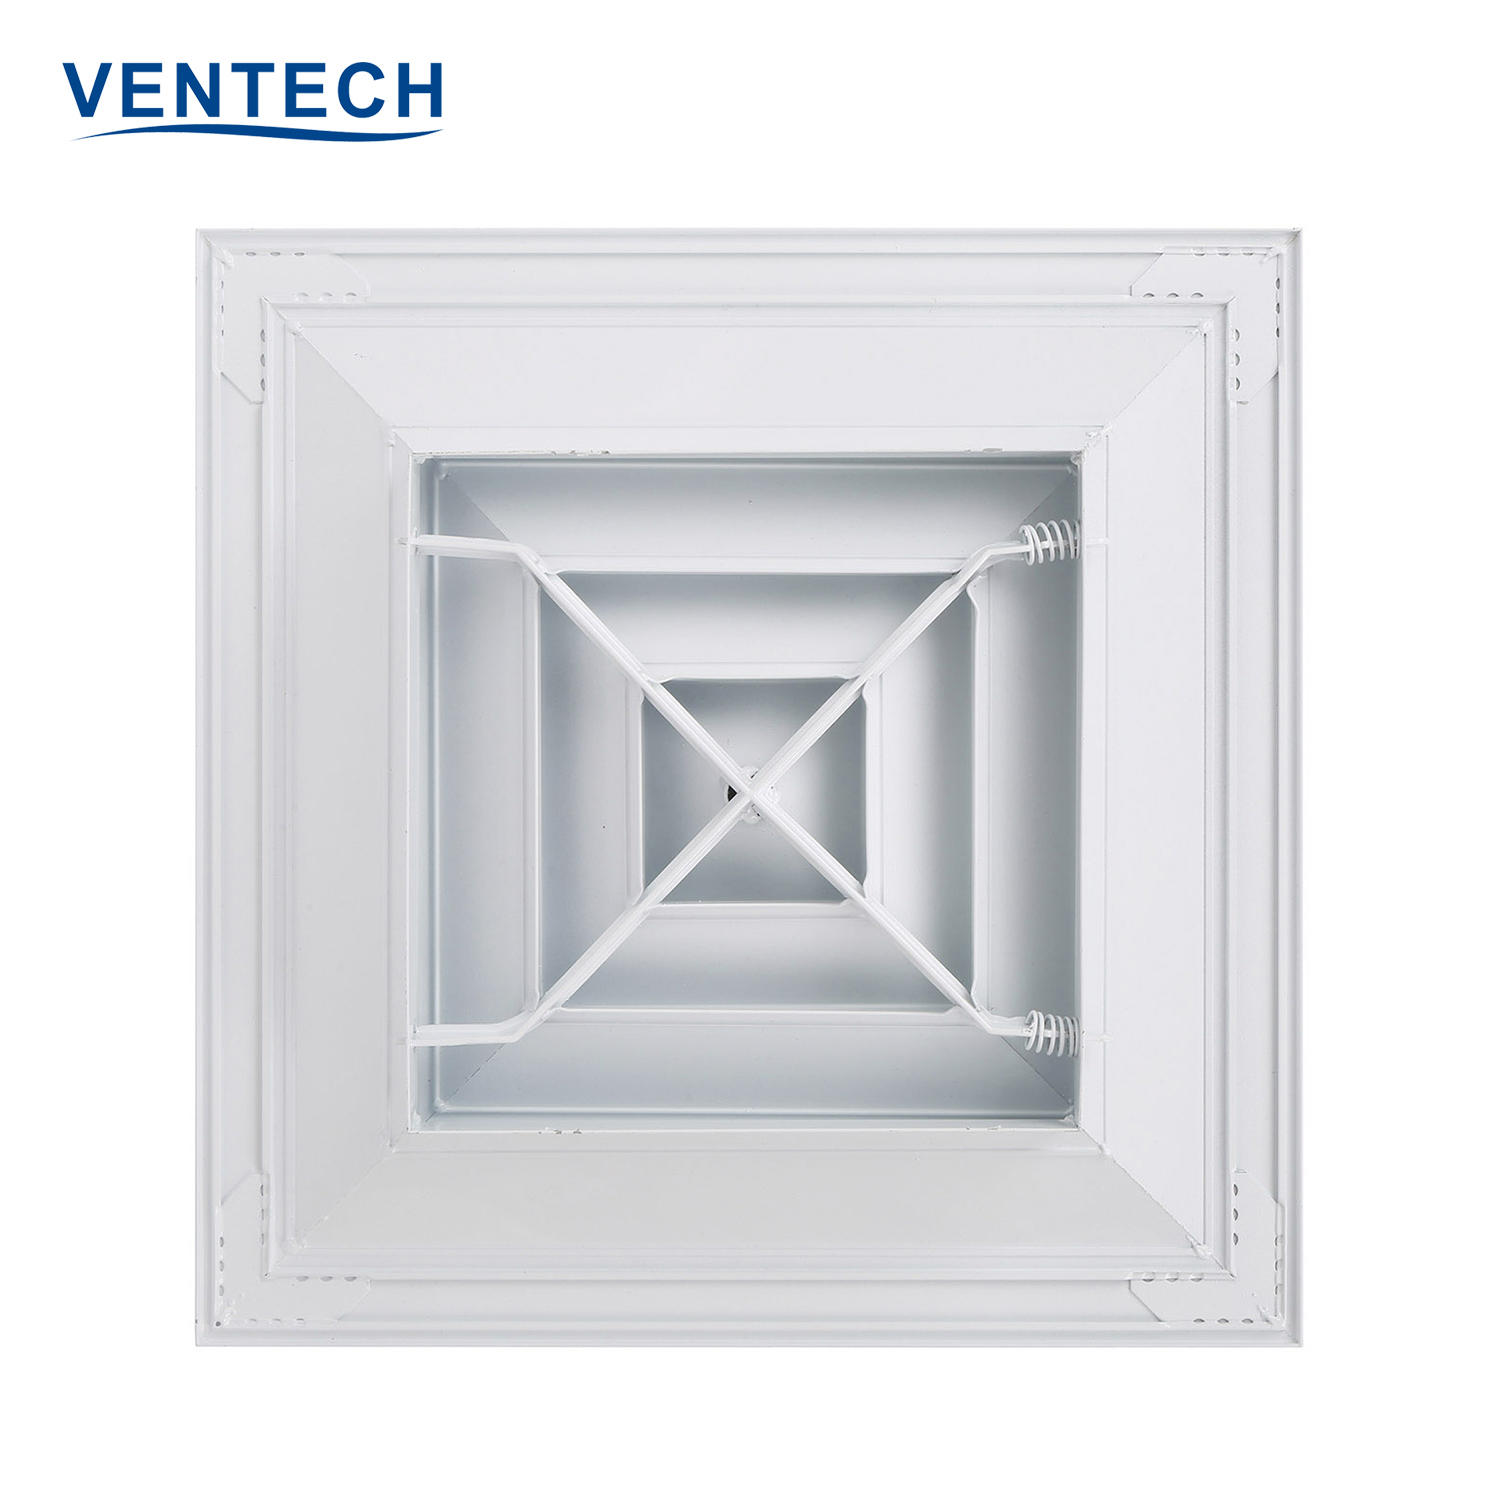 Hvac System VENTECH Exhaust Air Aluminum Conditioning Outlet Square Ceiling Air Duct Diffuser